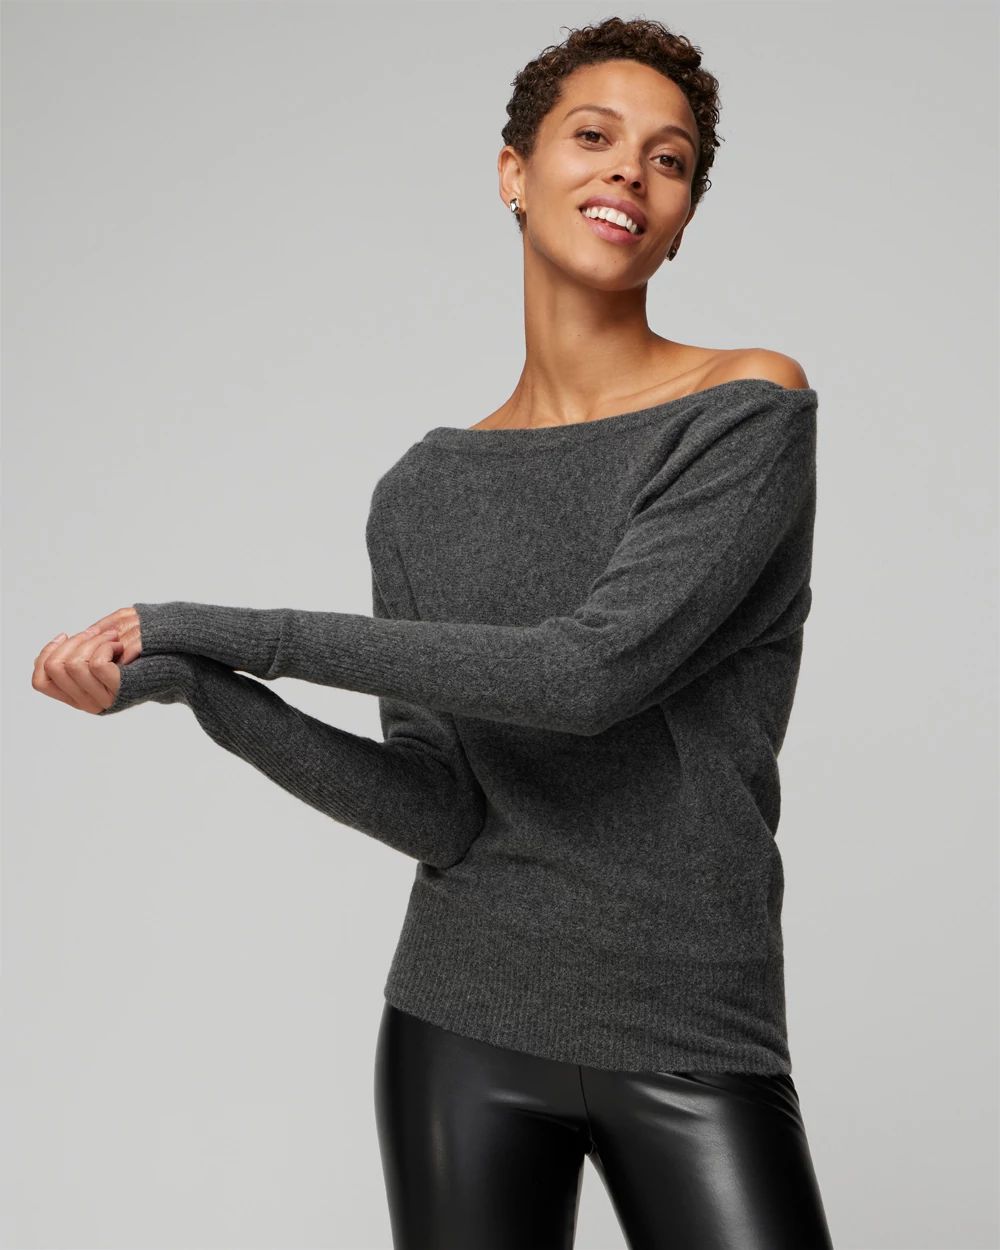 Asymmetrical Shoulder Pullover Sweater click to view larger image.